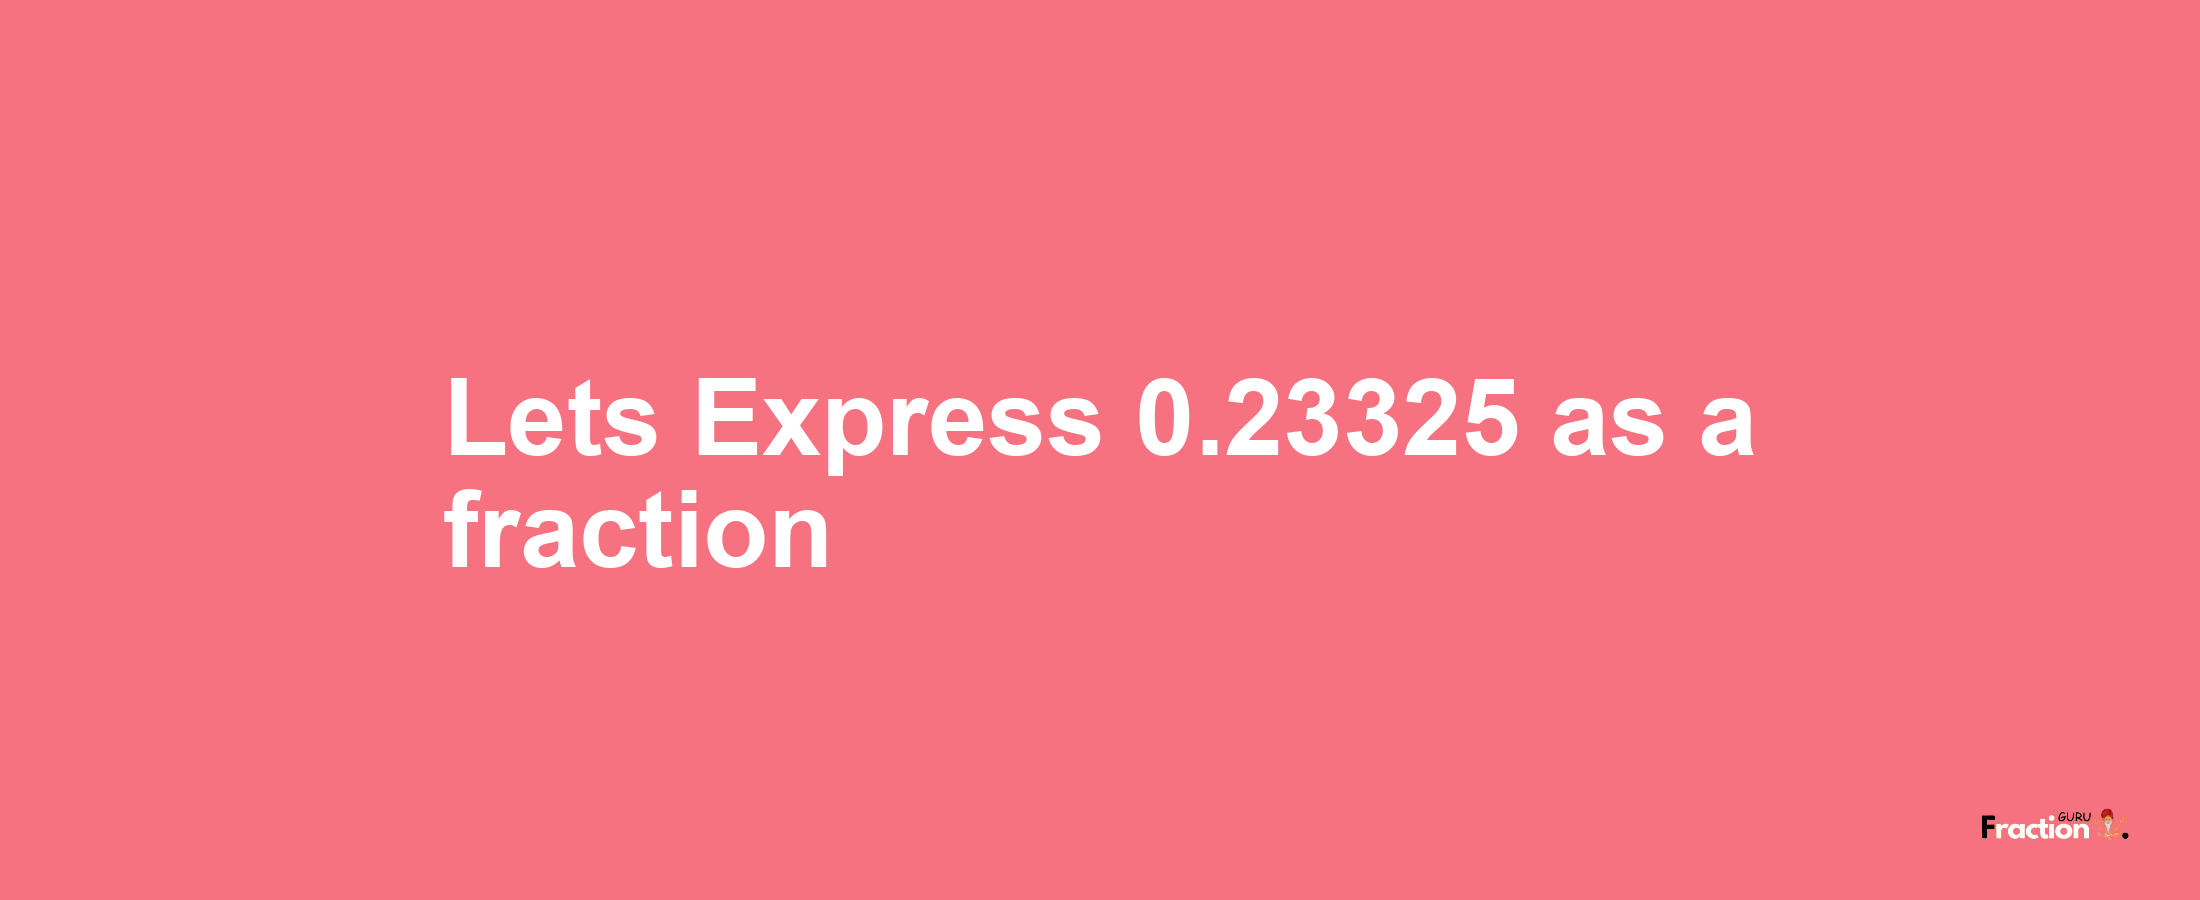 Lets Express 0.23325 as afraction